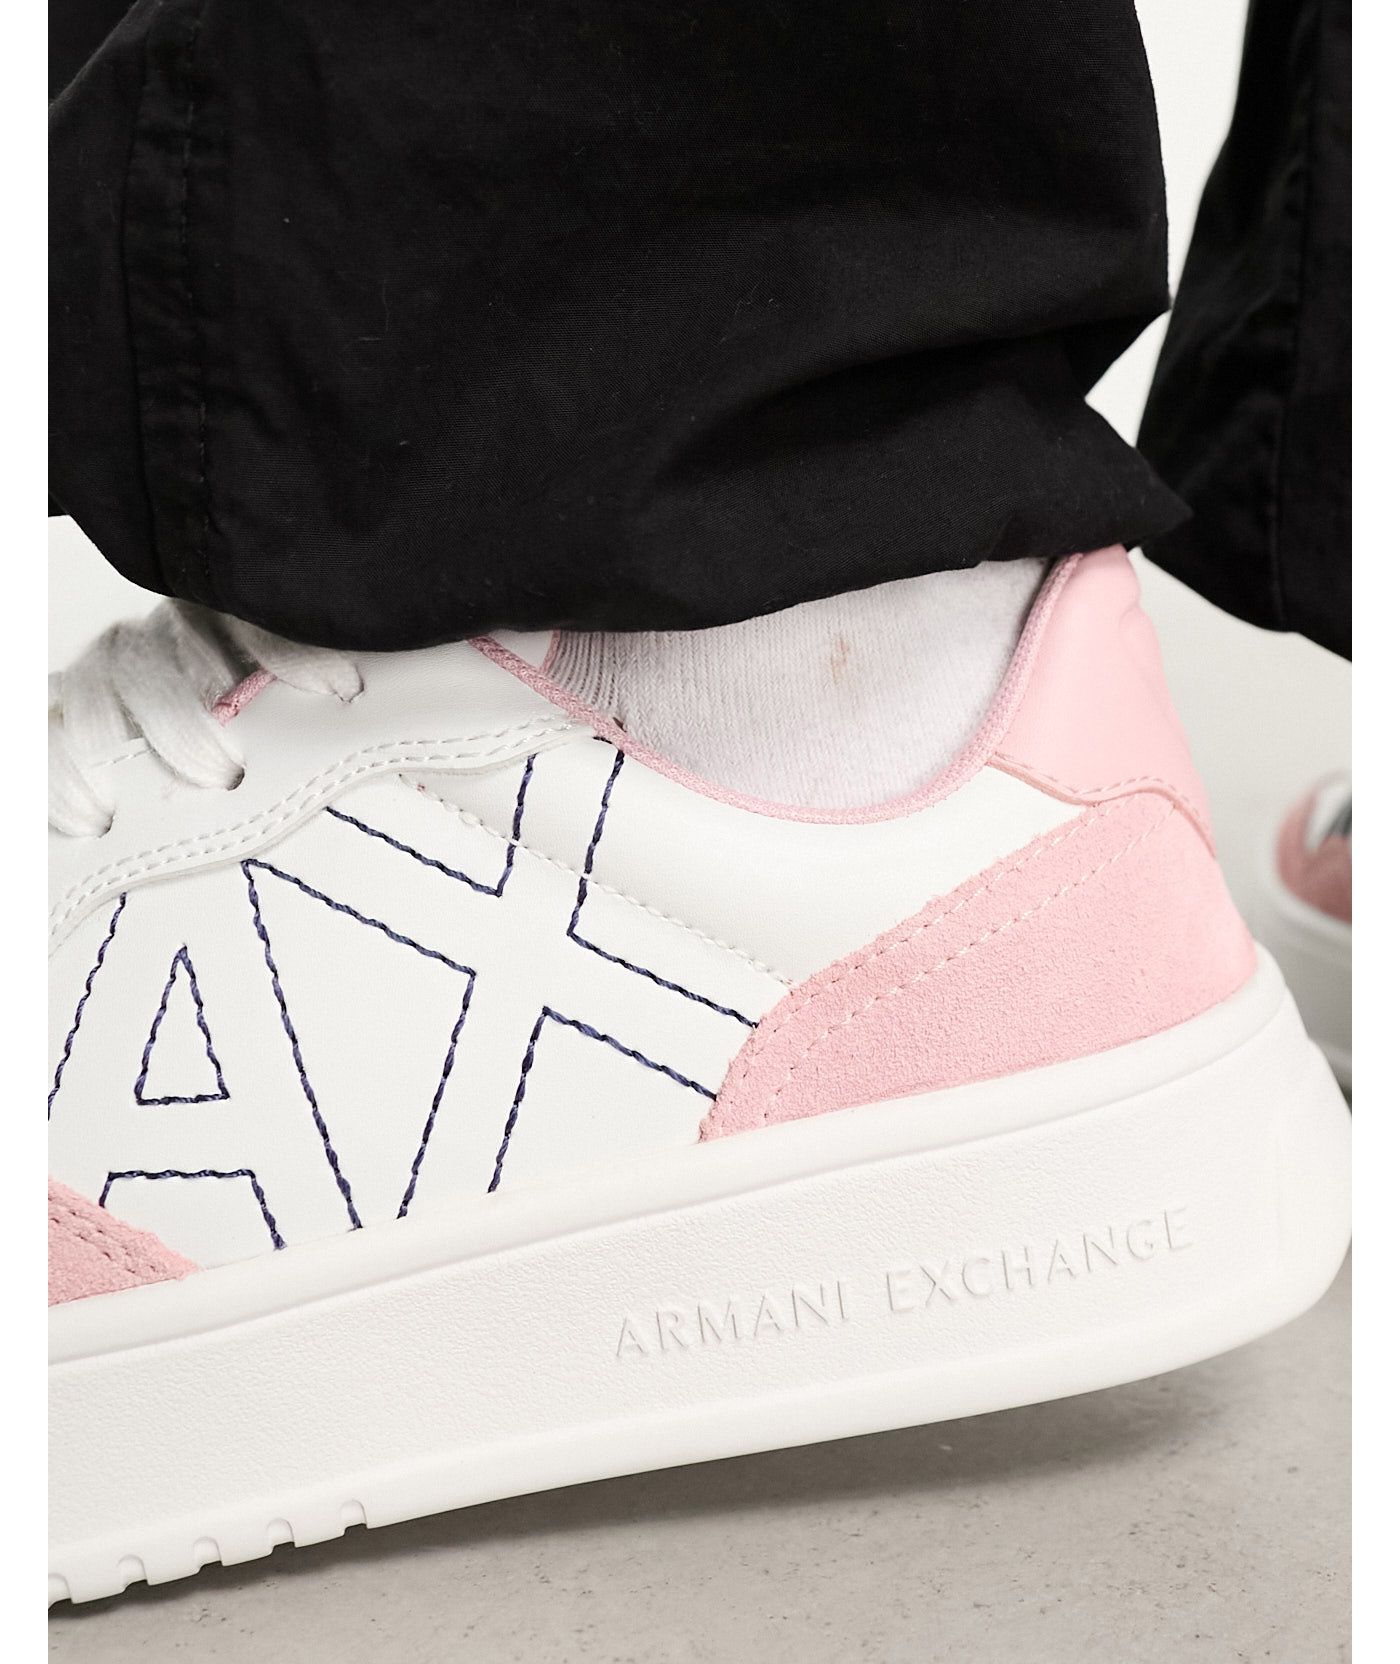 Armani Exchange trainers in white and pink